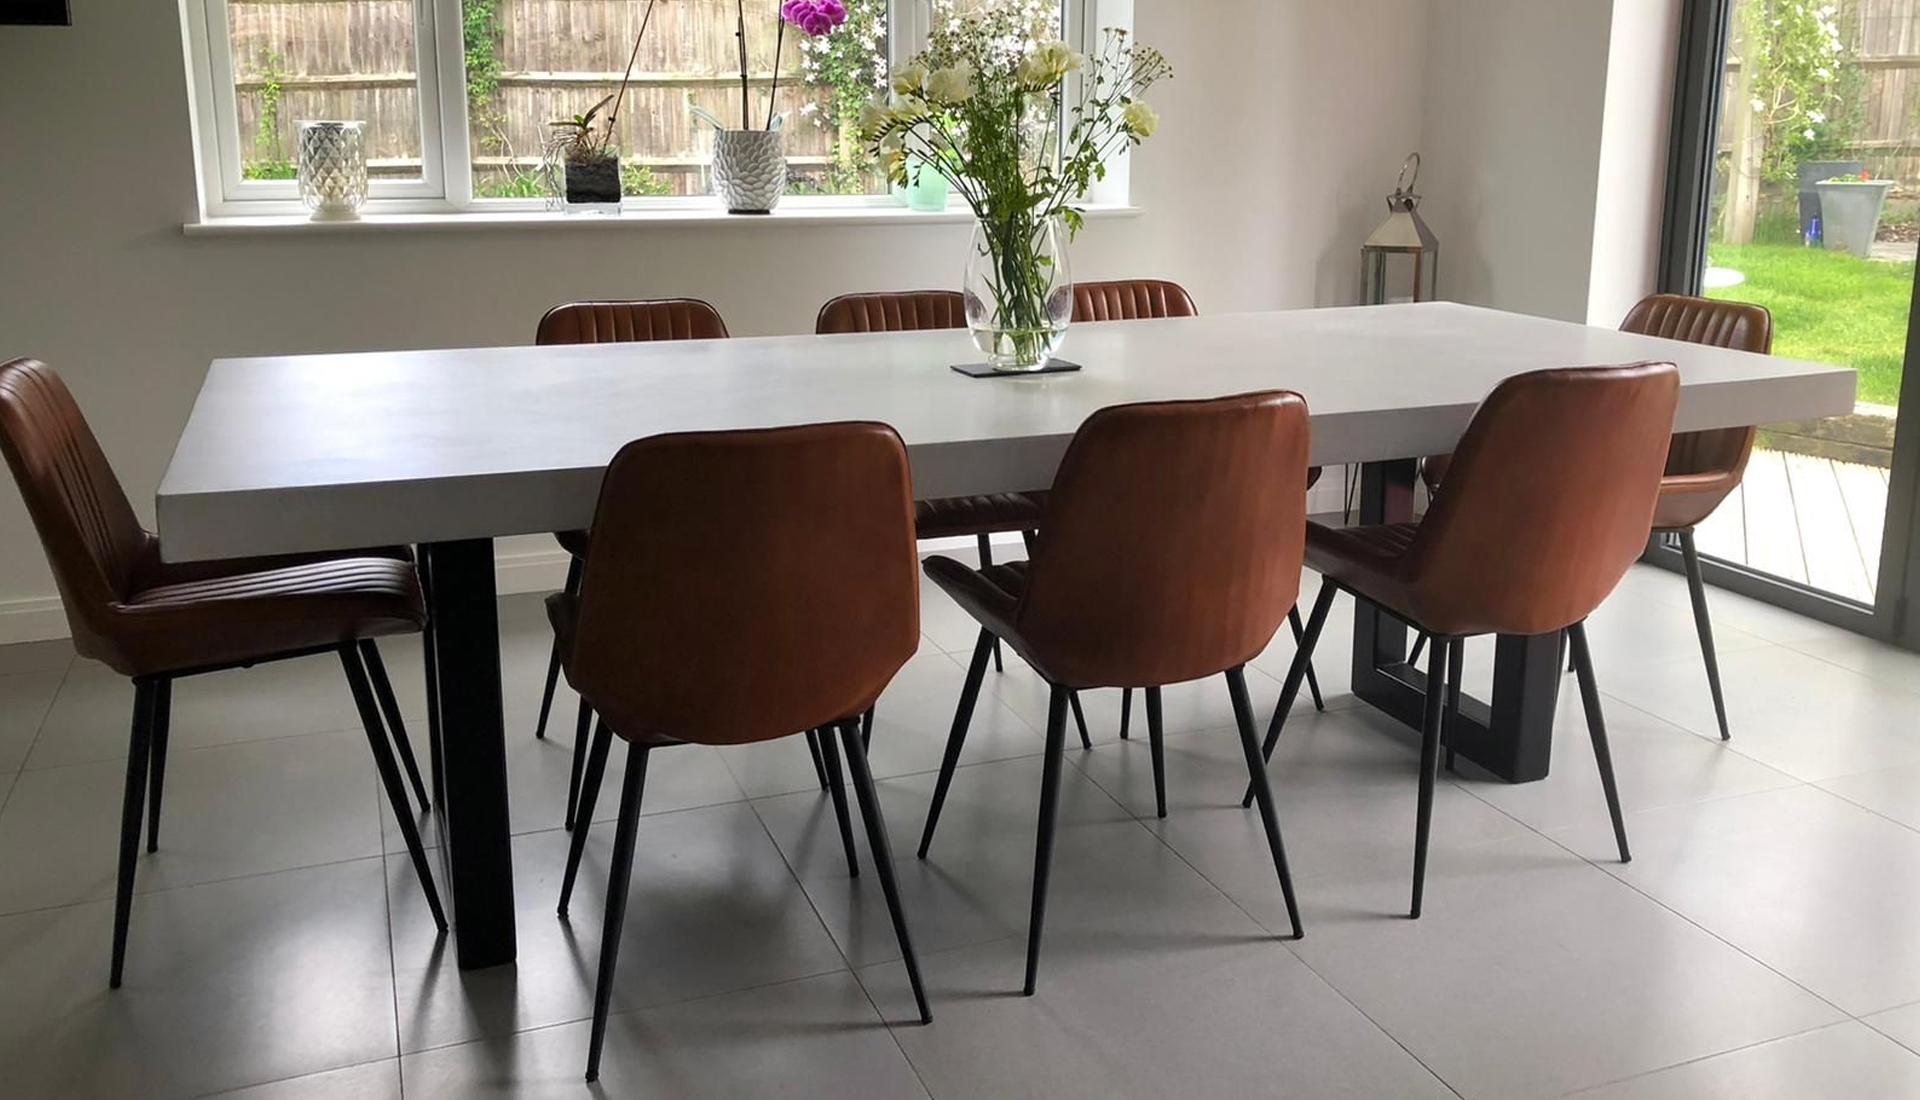 PROS AND CONS OF CONCRETE DINING ROOM TABLES: HOW TO DECIDE IF IT’S RIGHT FOR YOUR HOME